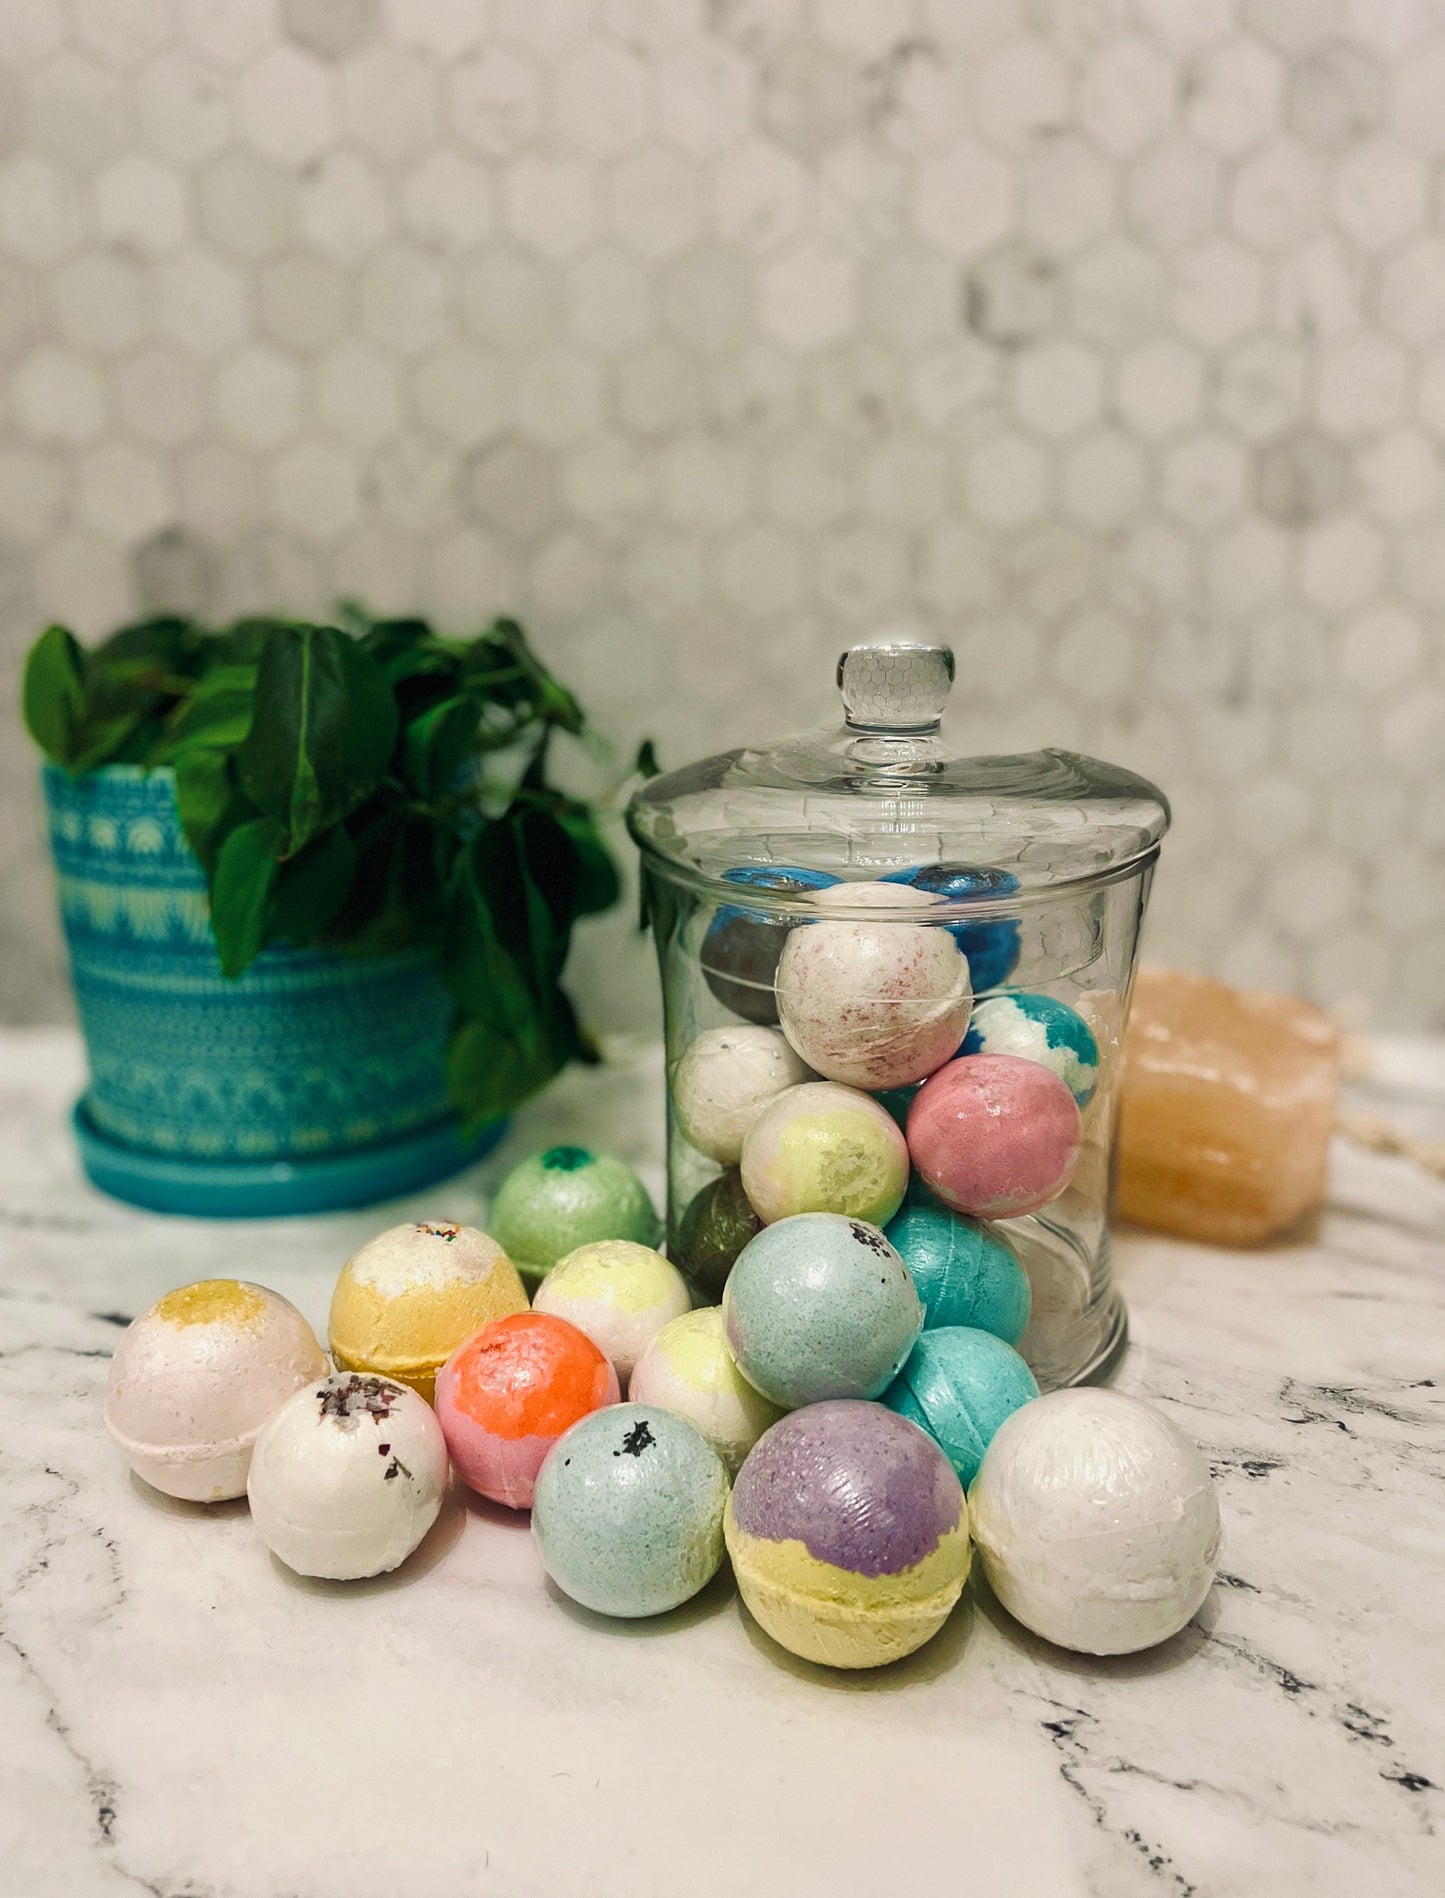 Design Your Own Bath Bombs - Gift Set of 6 - Bakery Fragrances